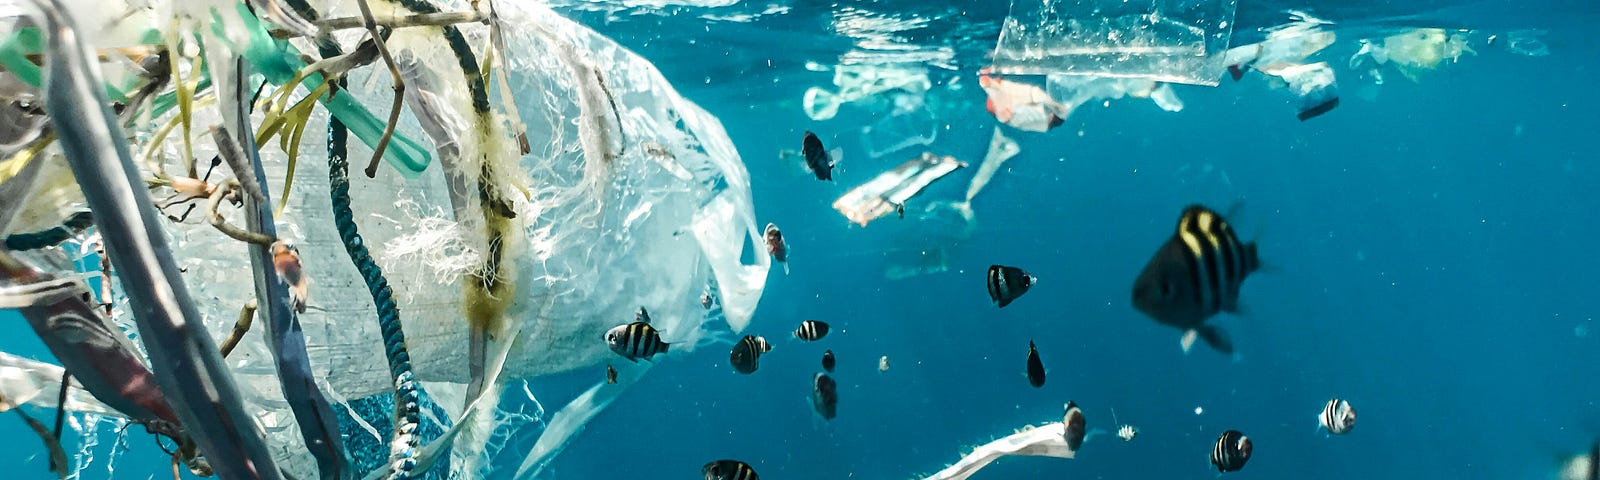 A school of tropical fish check out a bunch of garbage floating in the ocean.